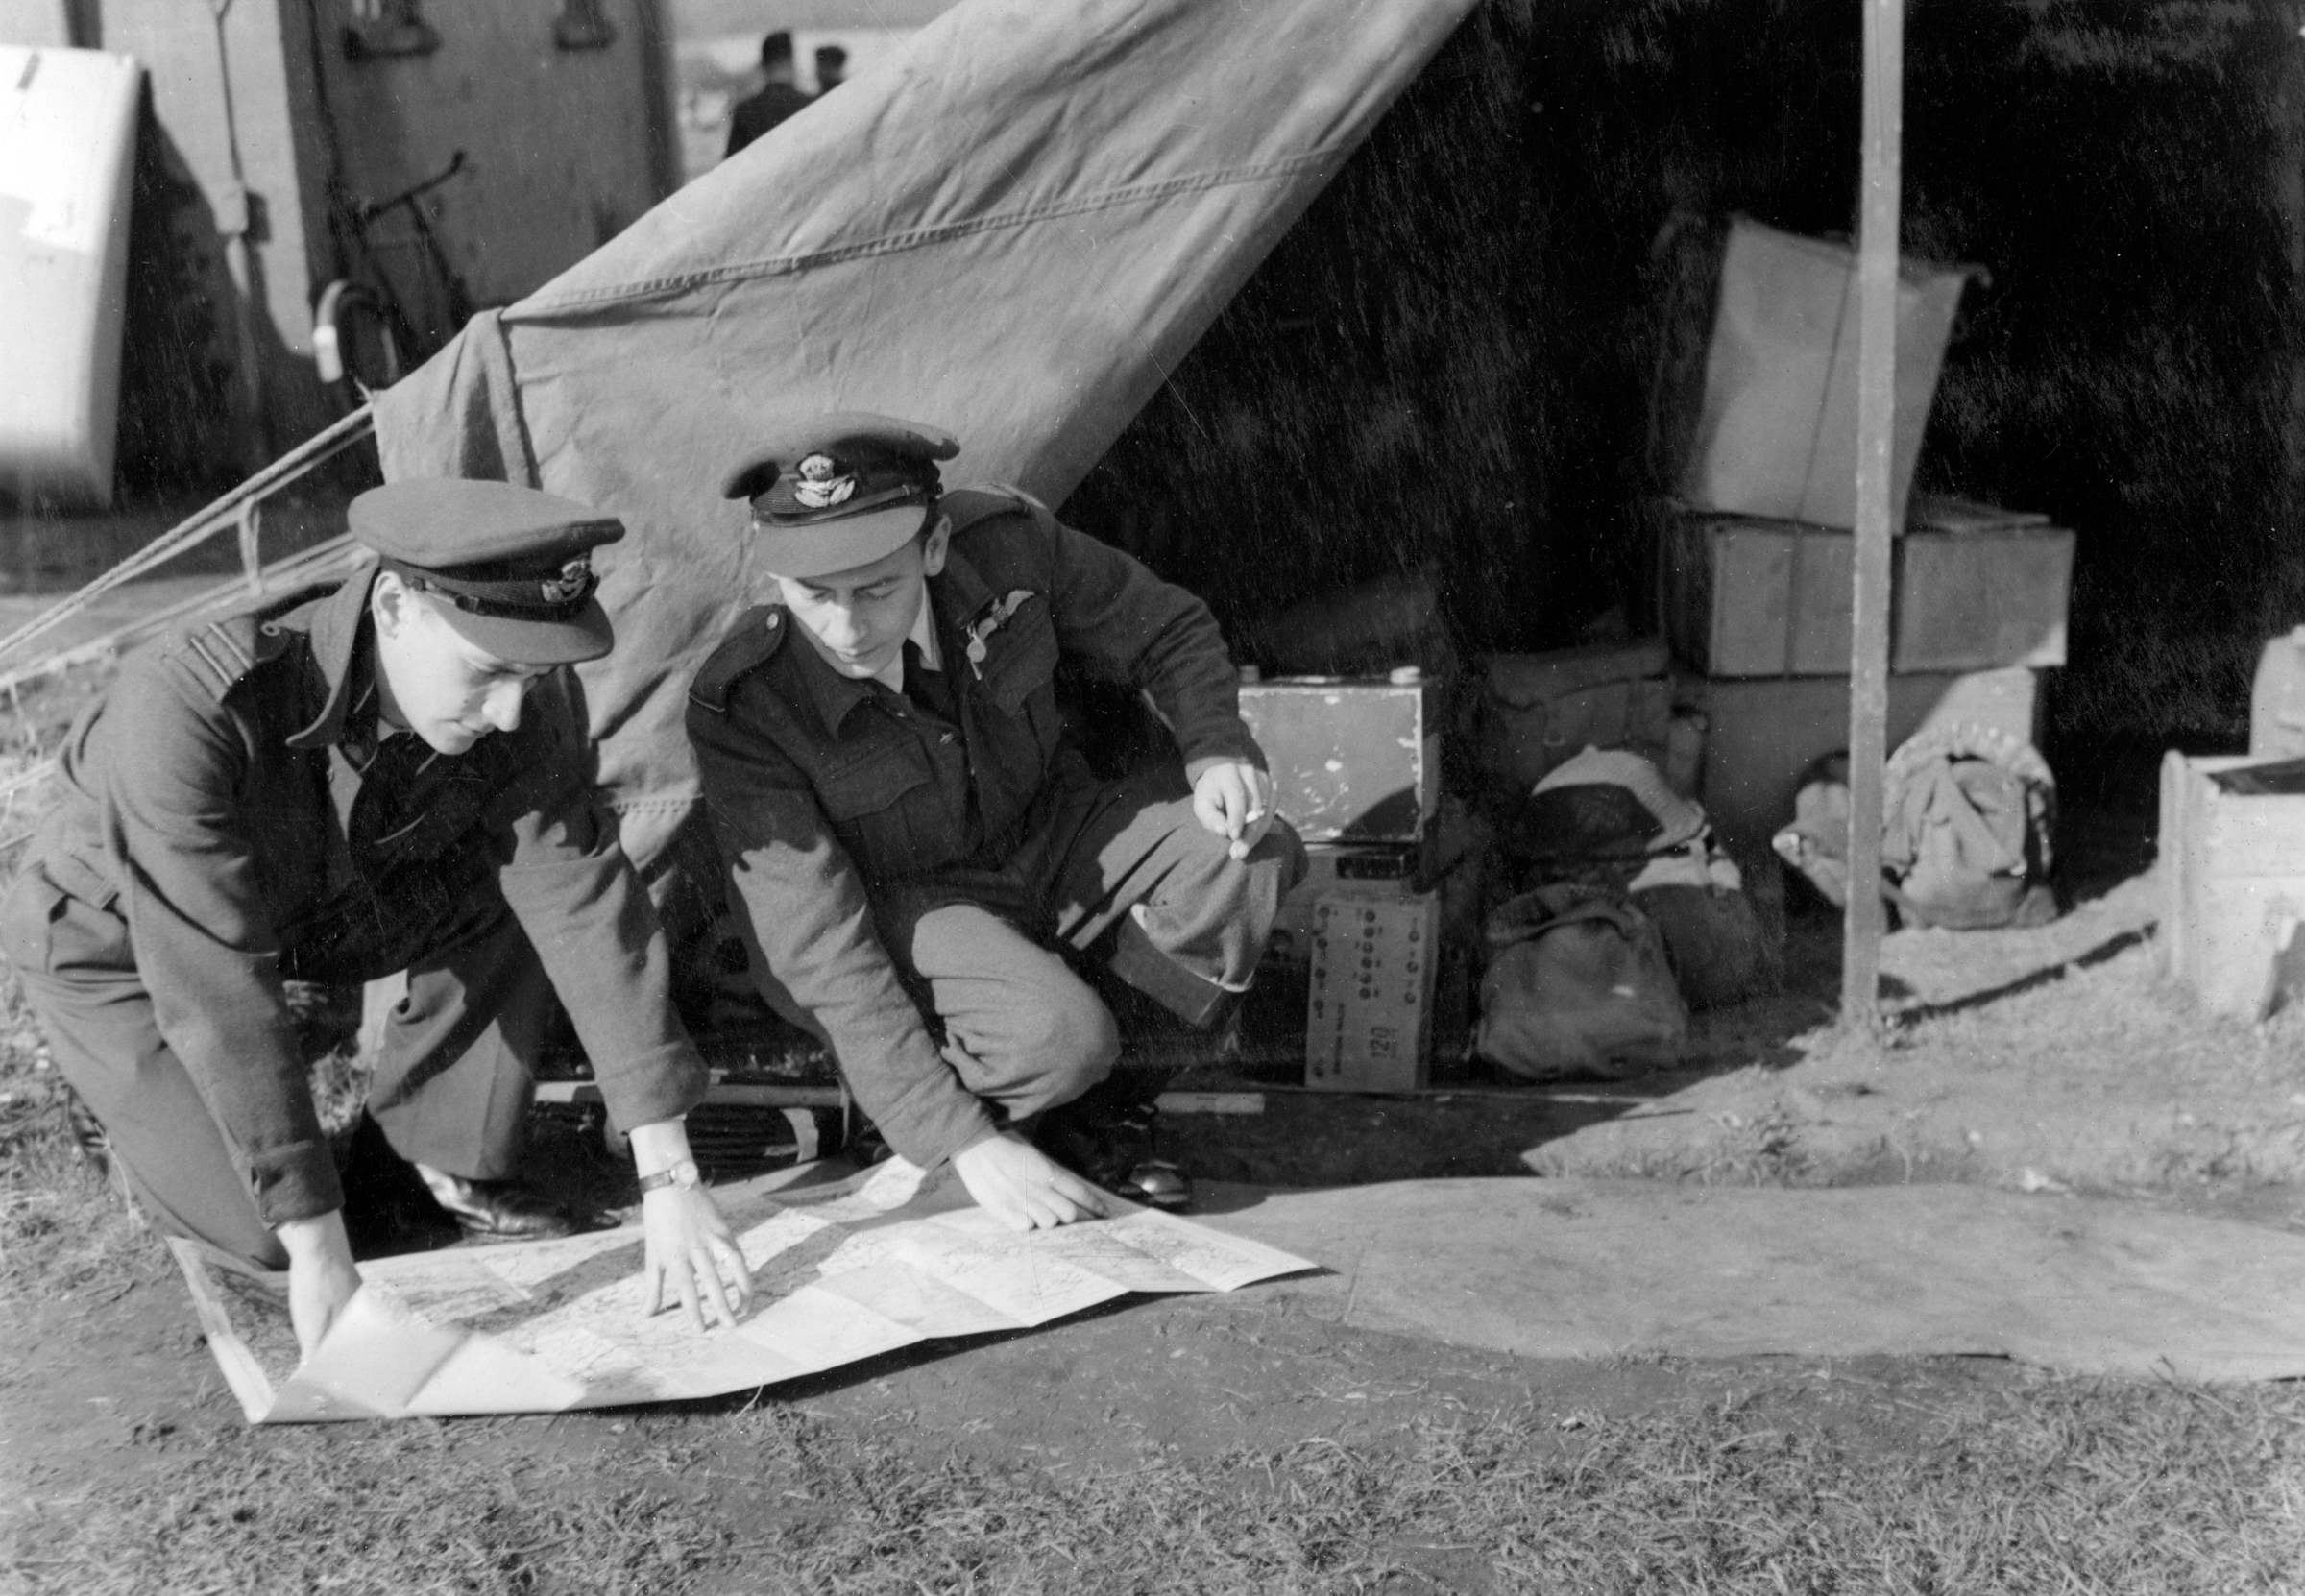 Personnel study a map on the ground, in front of a tent on the airfield.